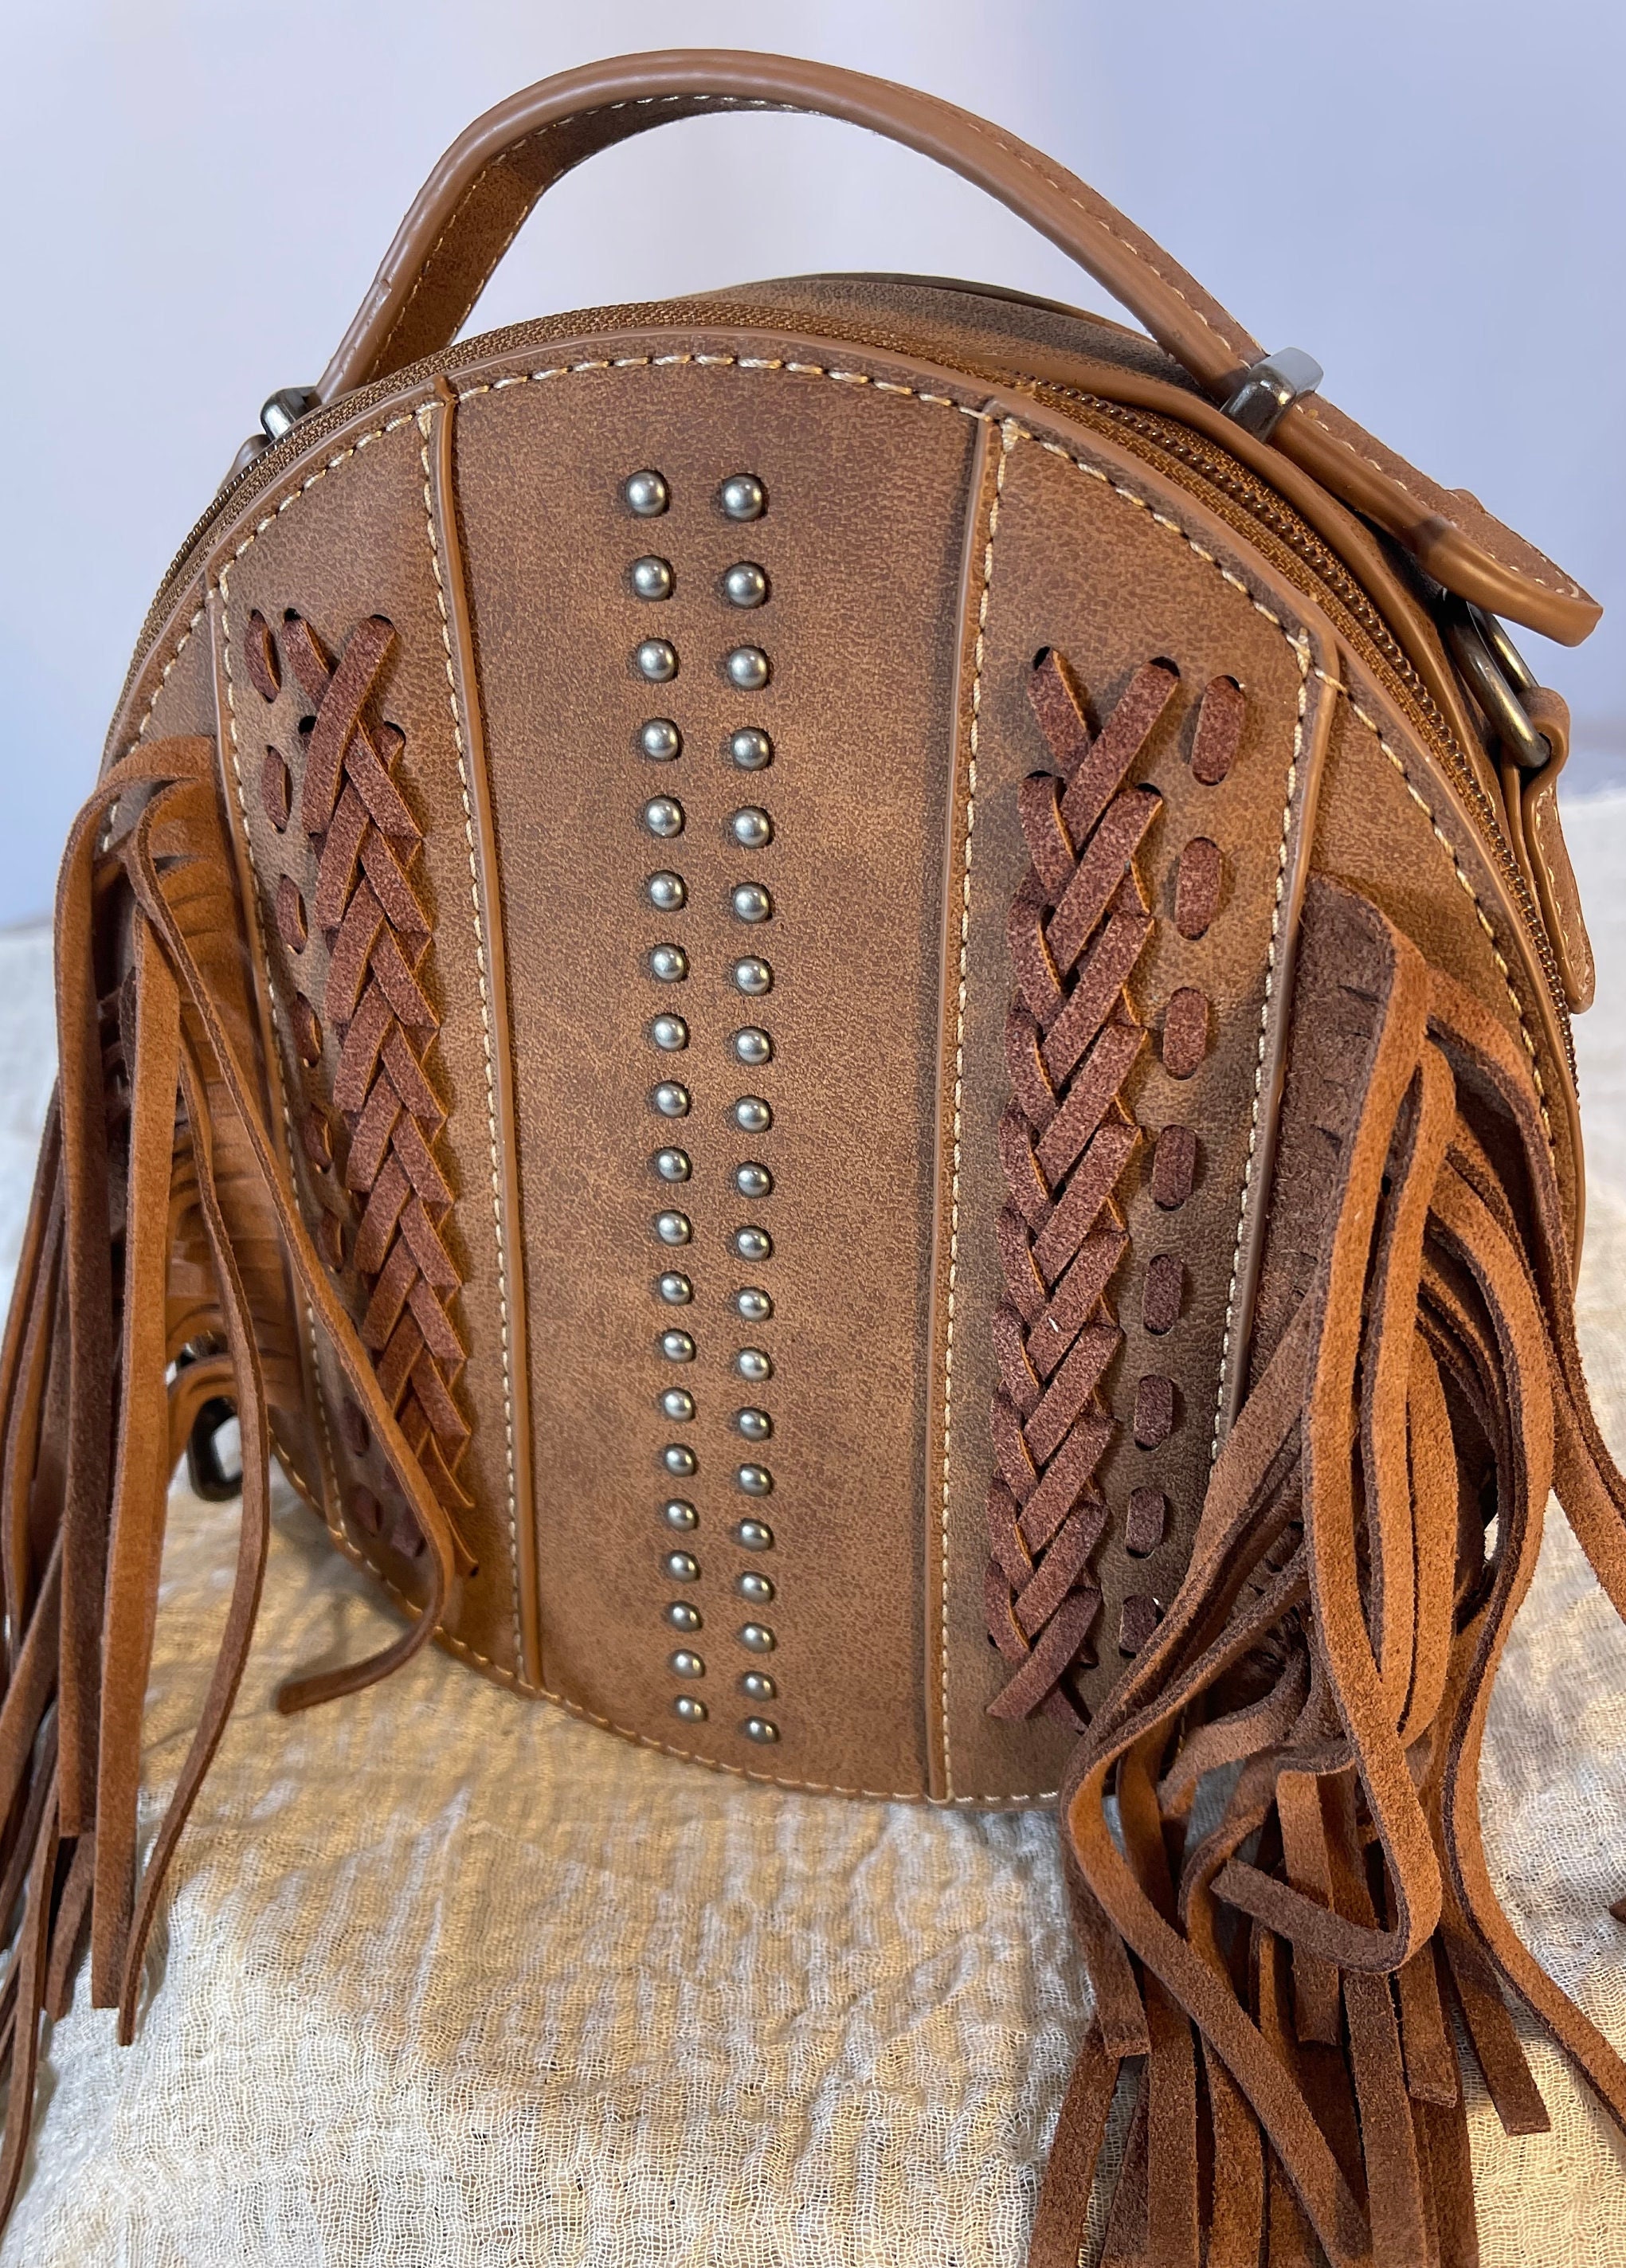 Coach 1941 Fringe Saddle Bag with Pyramid Rivets in Oxblood Smooth Lea |  Oxblood, Smooth leather, Coach 1941